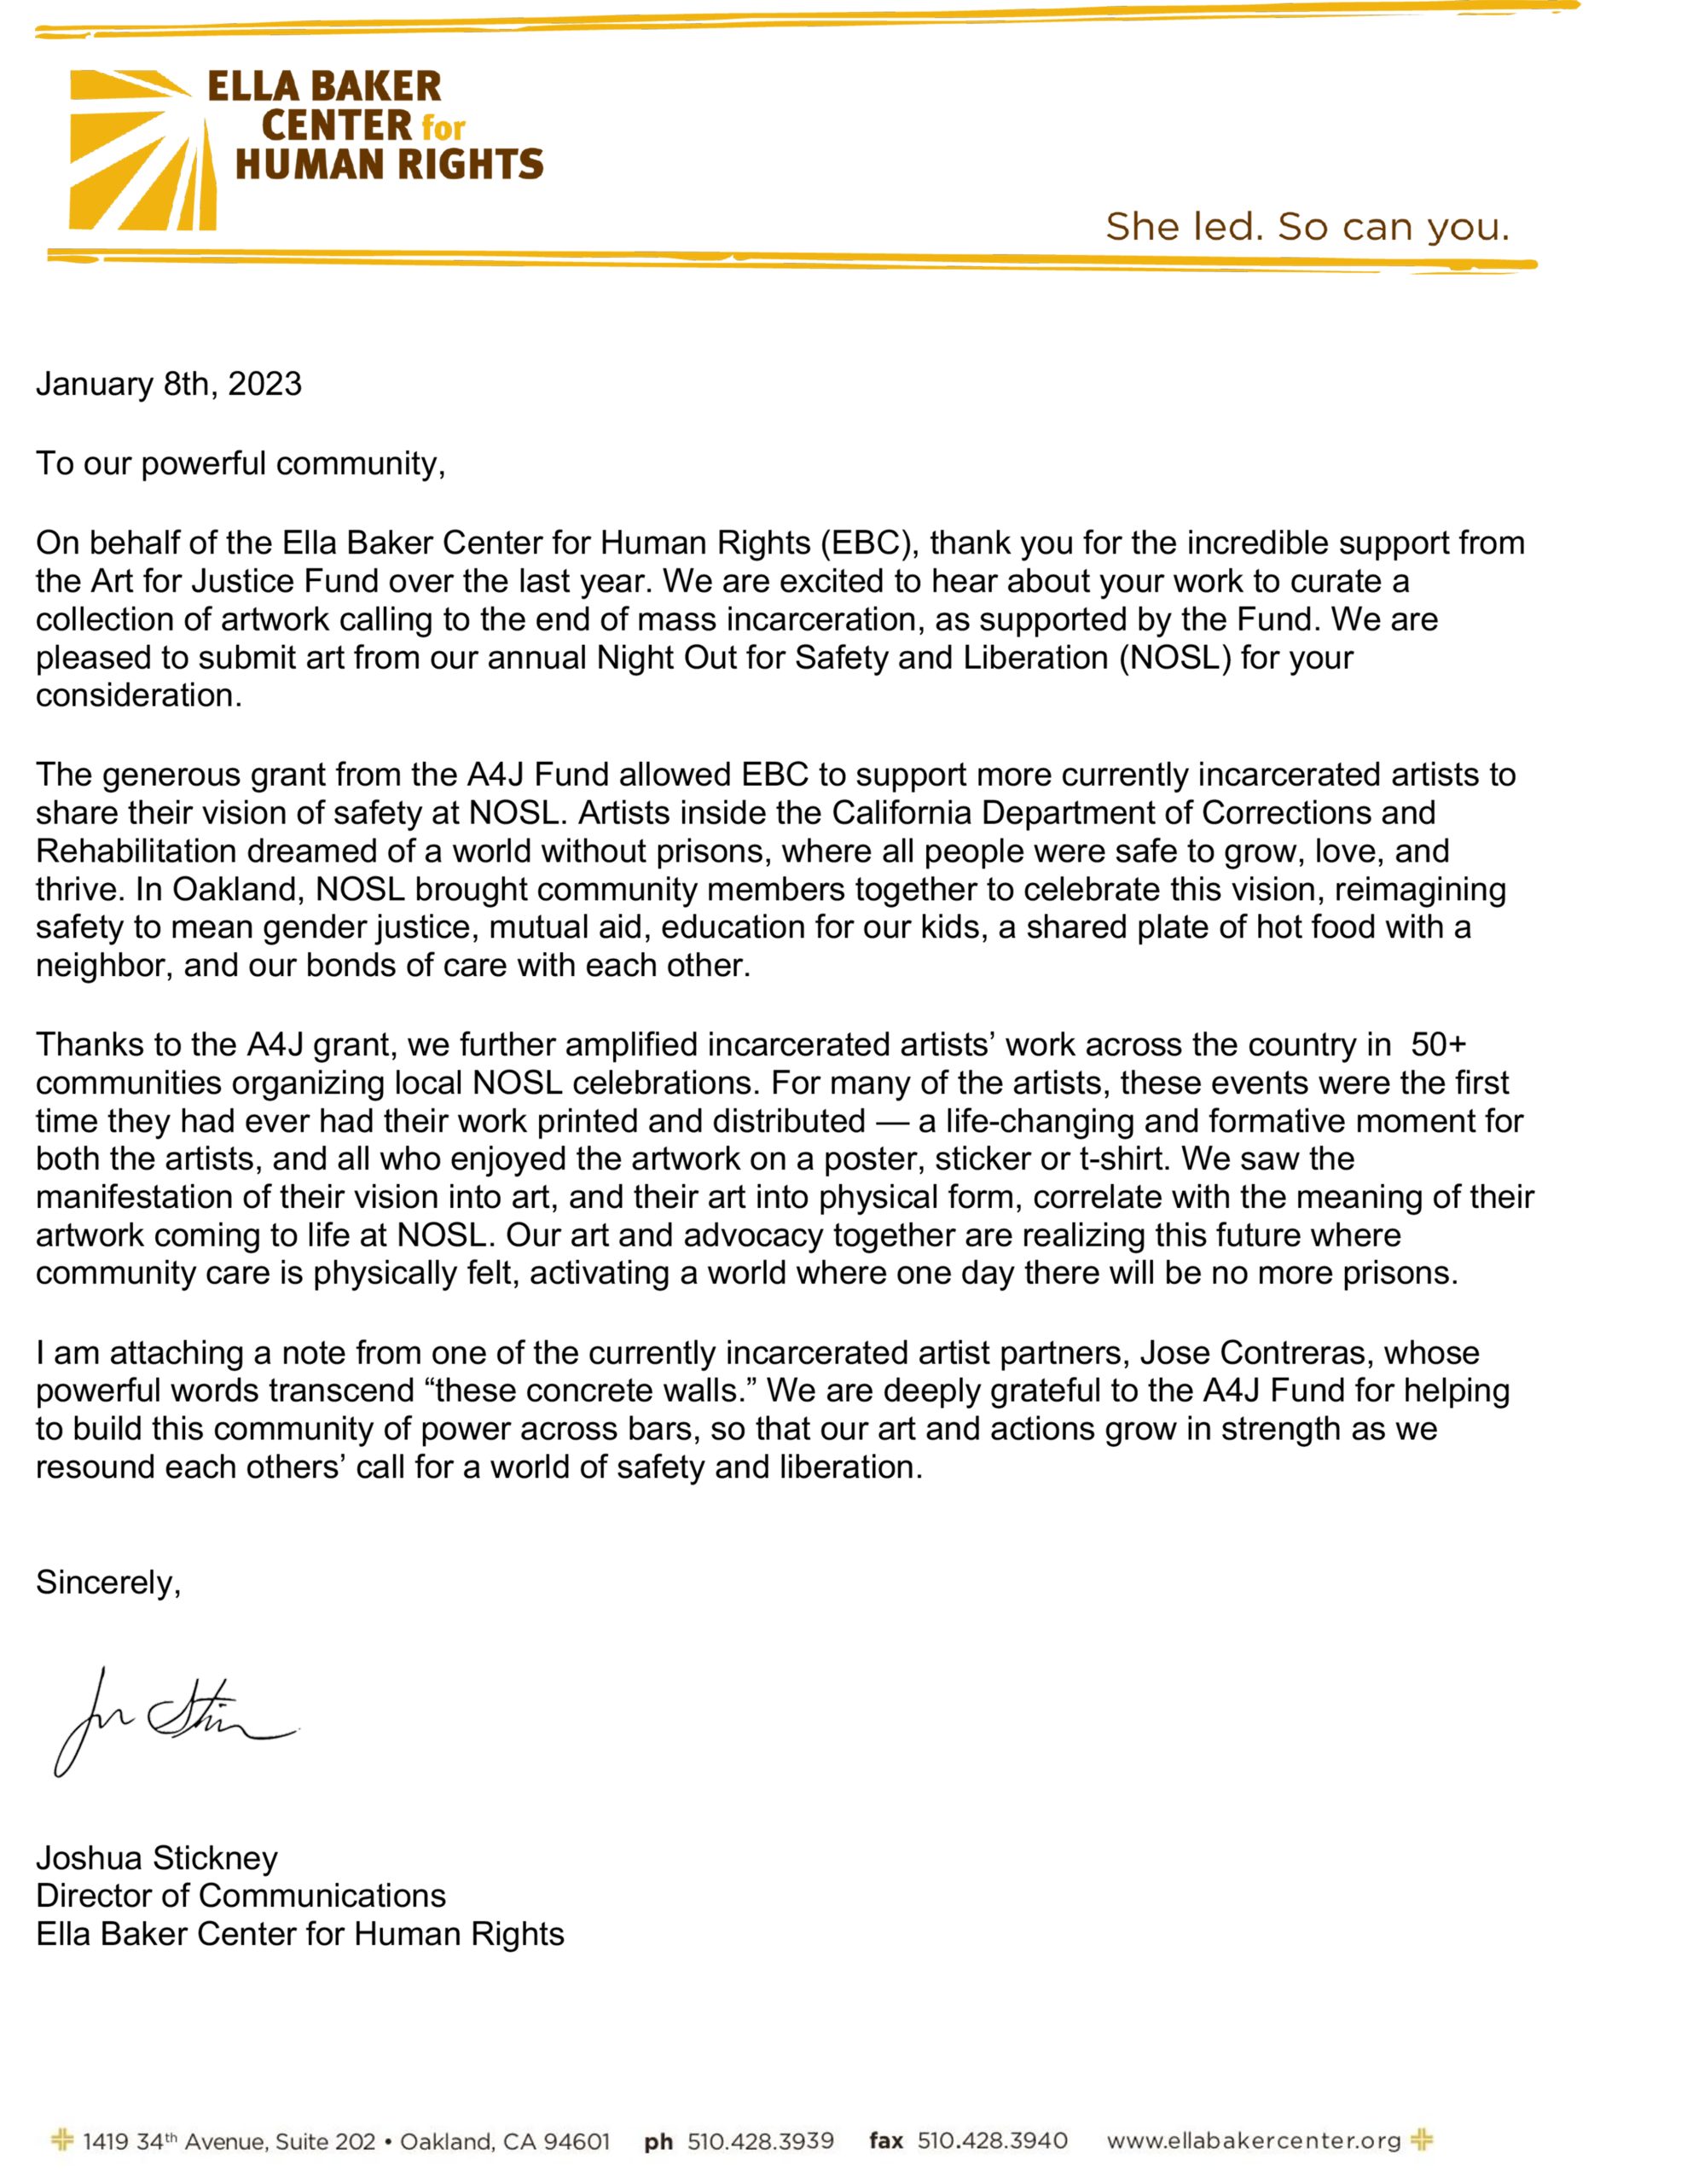 A typed letter on Ella Baker Center for Human Rights letterhead with a yellow design at the top evoking rays of light across the top, with the text 